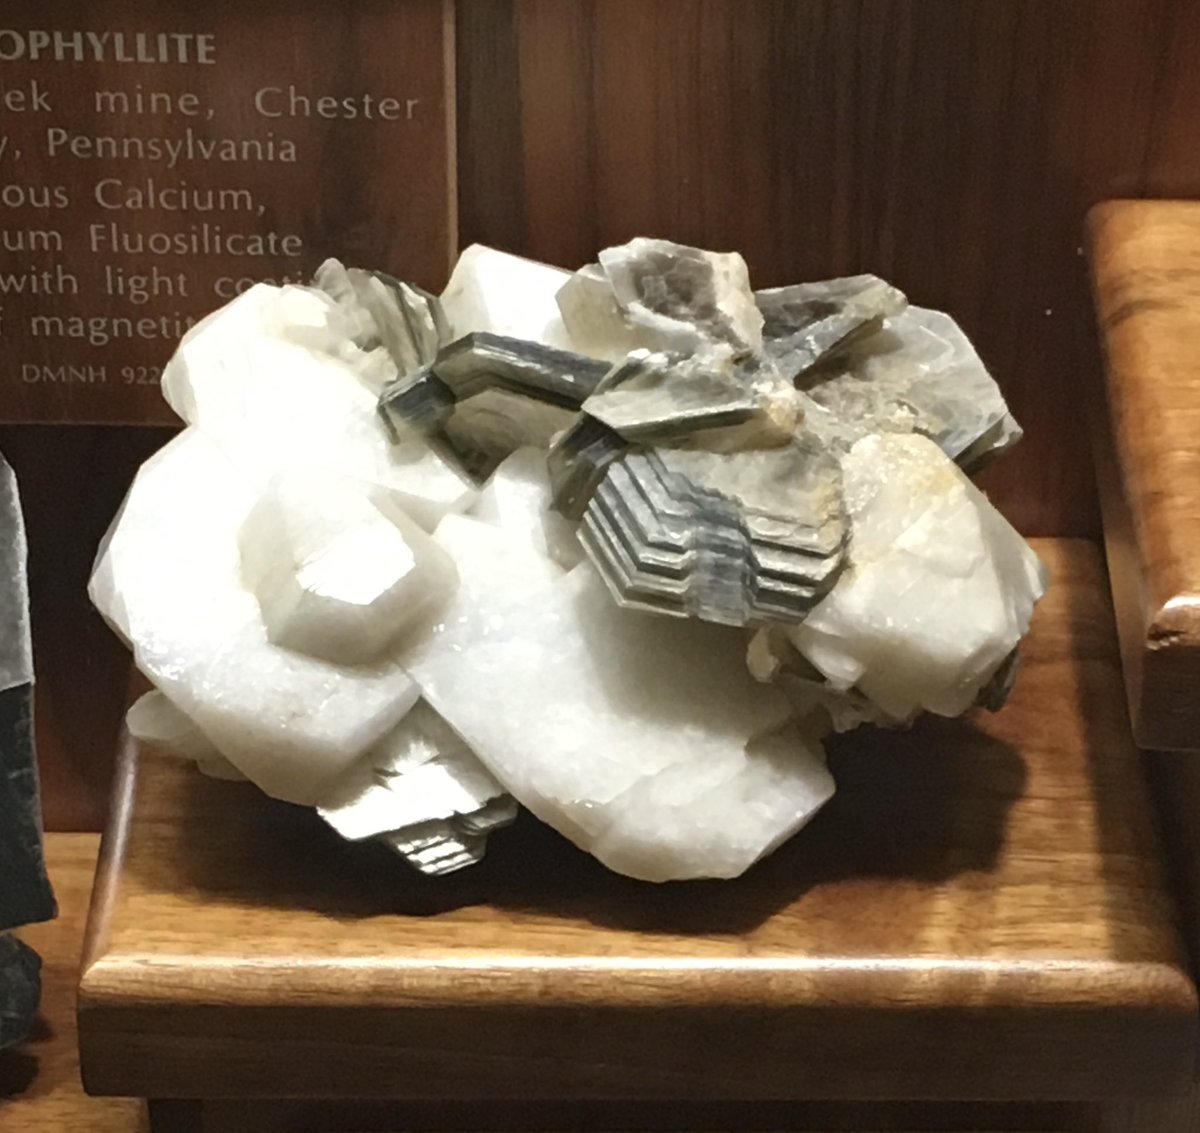 Books of thin muscovite crystals on albite crystals. Mica is sometimes touted as an eco friendly alternative for plastic glitter, but is sometimes still covered in plastic, and child labour can be an issue in its mining. #MineralMonday #GeoscienceTwitter